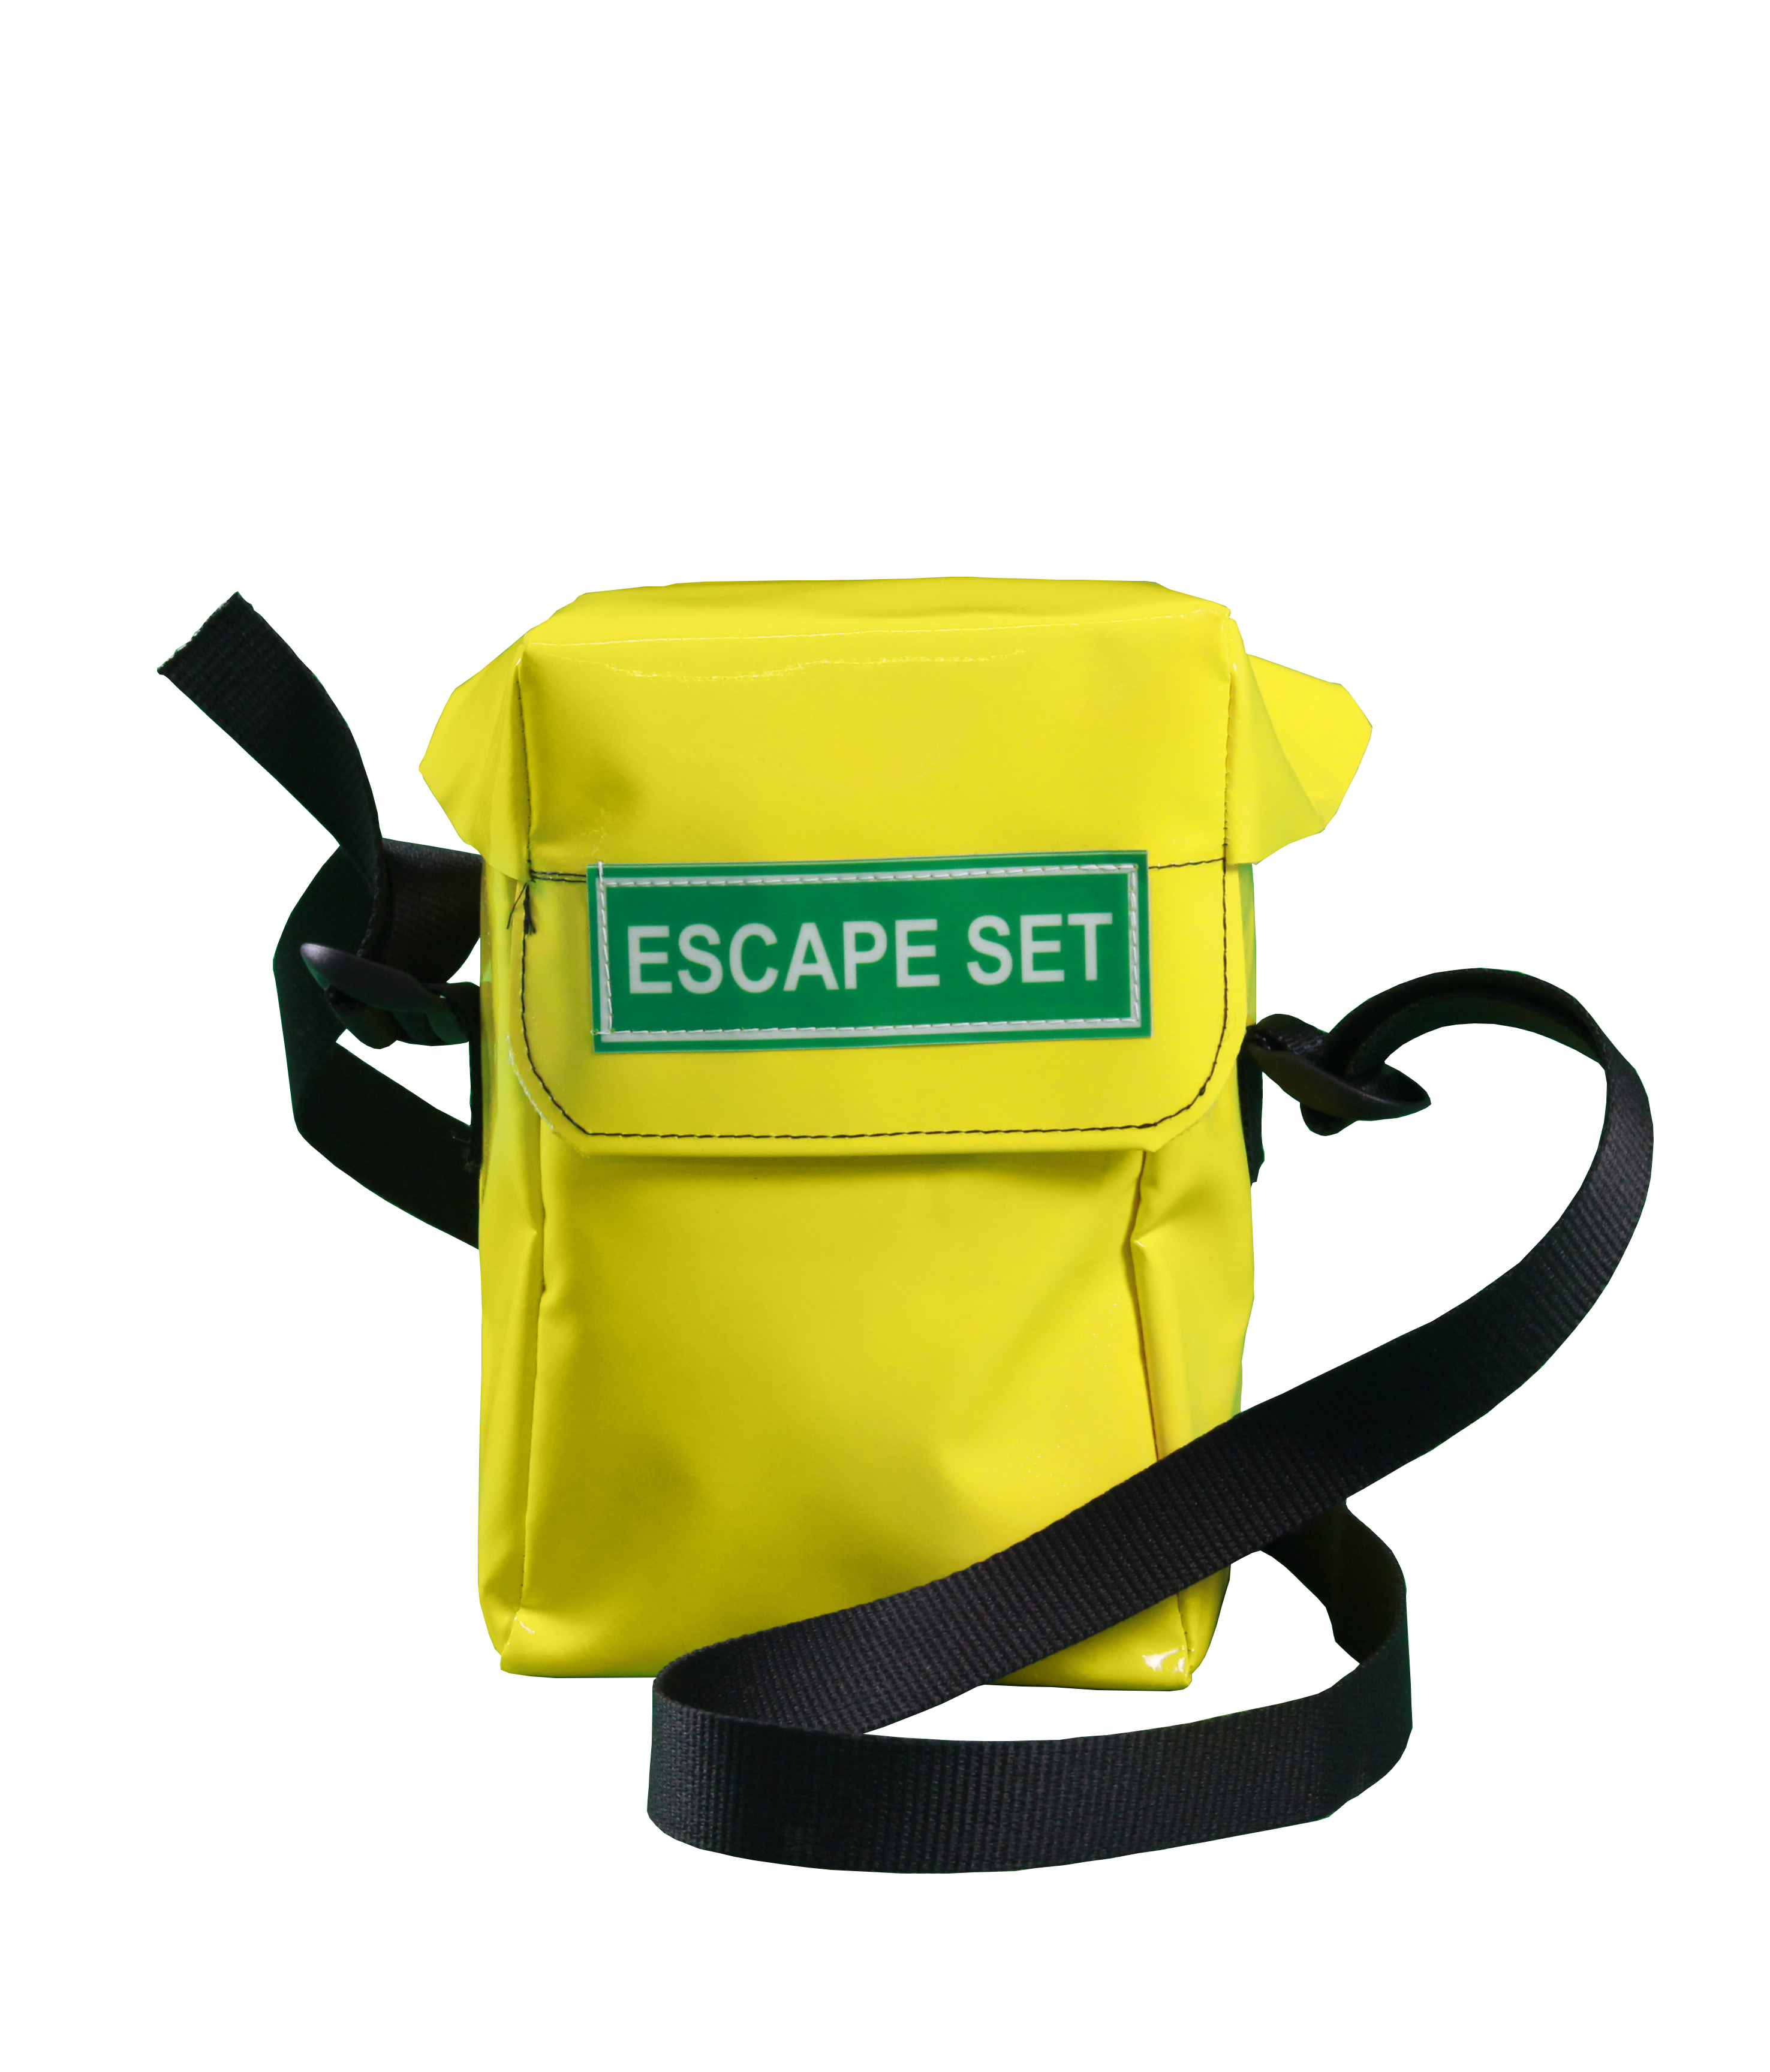 SG06154 Personal Grab Bag Grab bag with personal escape aid to abandon the installation in case of a fire. The personal grab bag is mostly used on offshore platforms. To be used in the event of a fire.